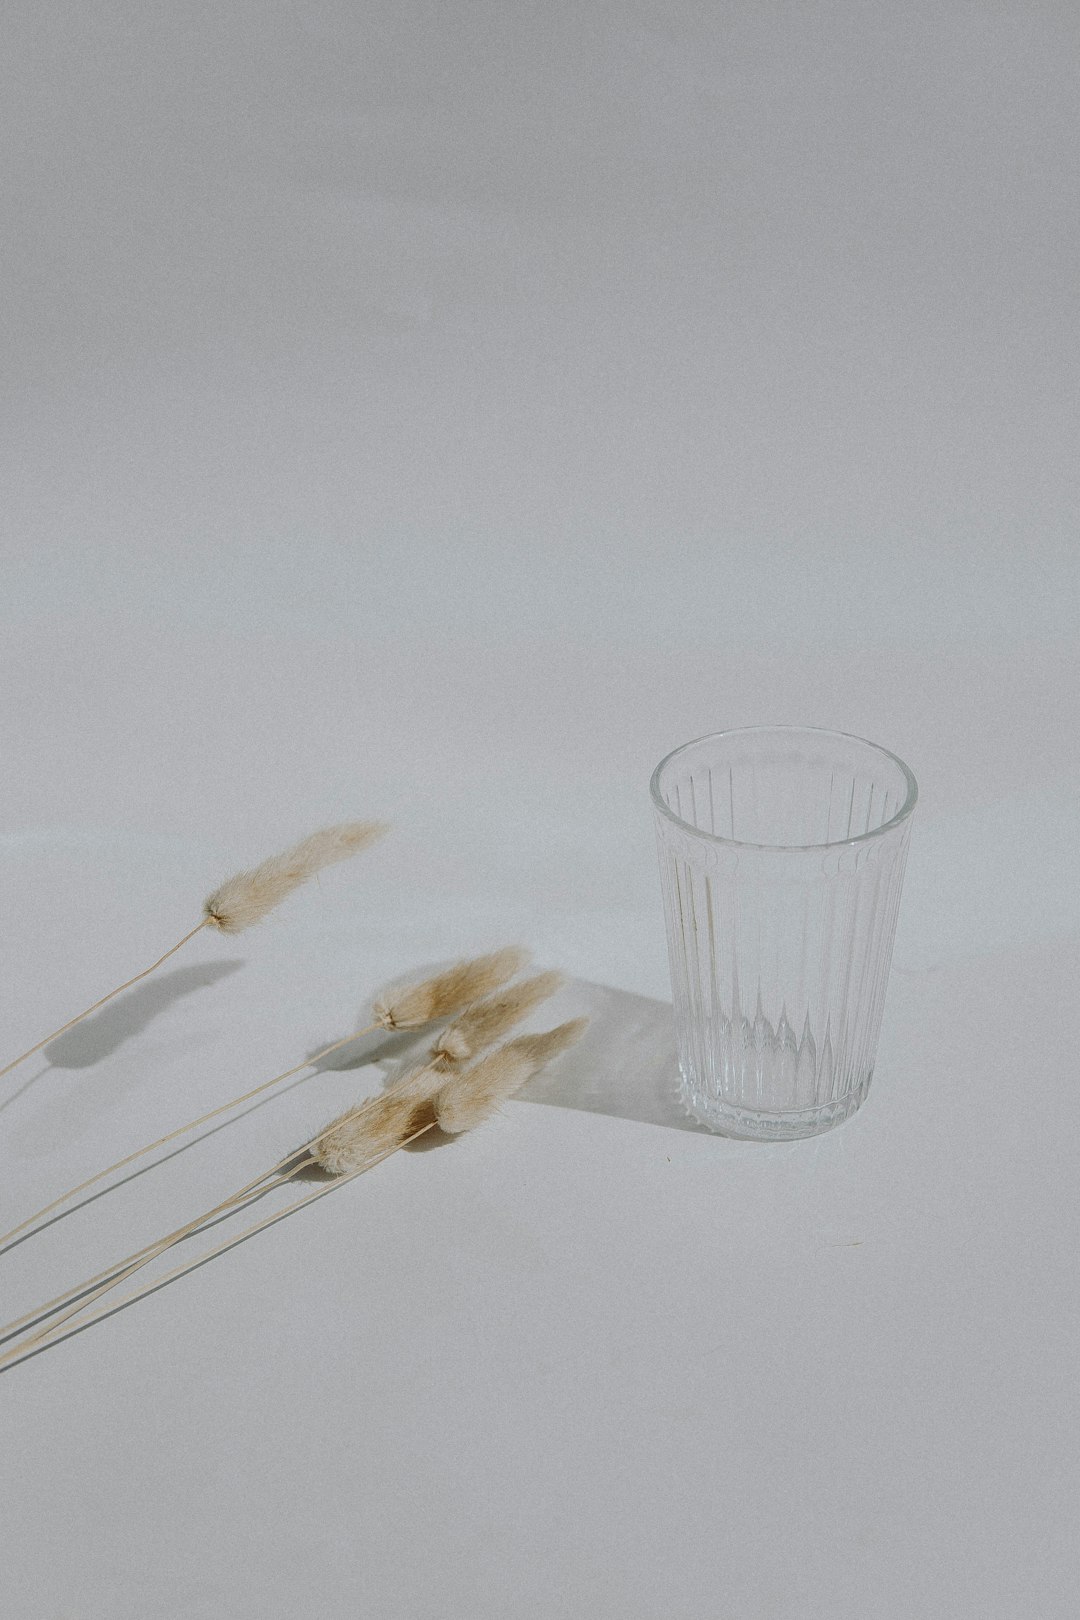 clear drinking glass beside white plastic spoon